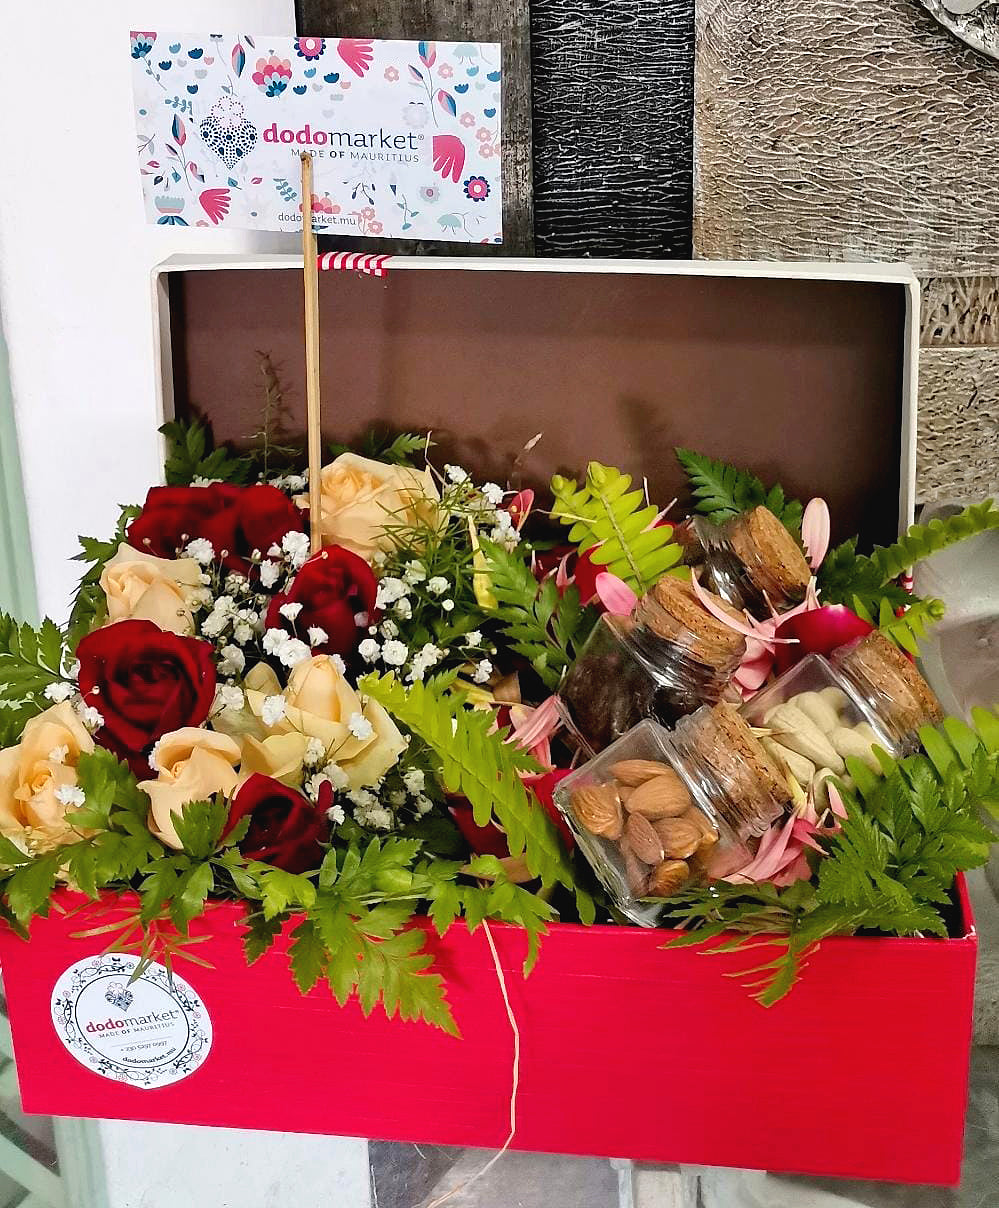 Alhadaya-Hamper-gift-box-Flowers-fruits-nuts-DodoMarket-delivery-Mauritius